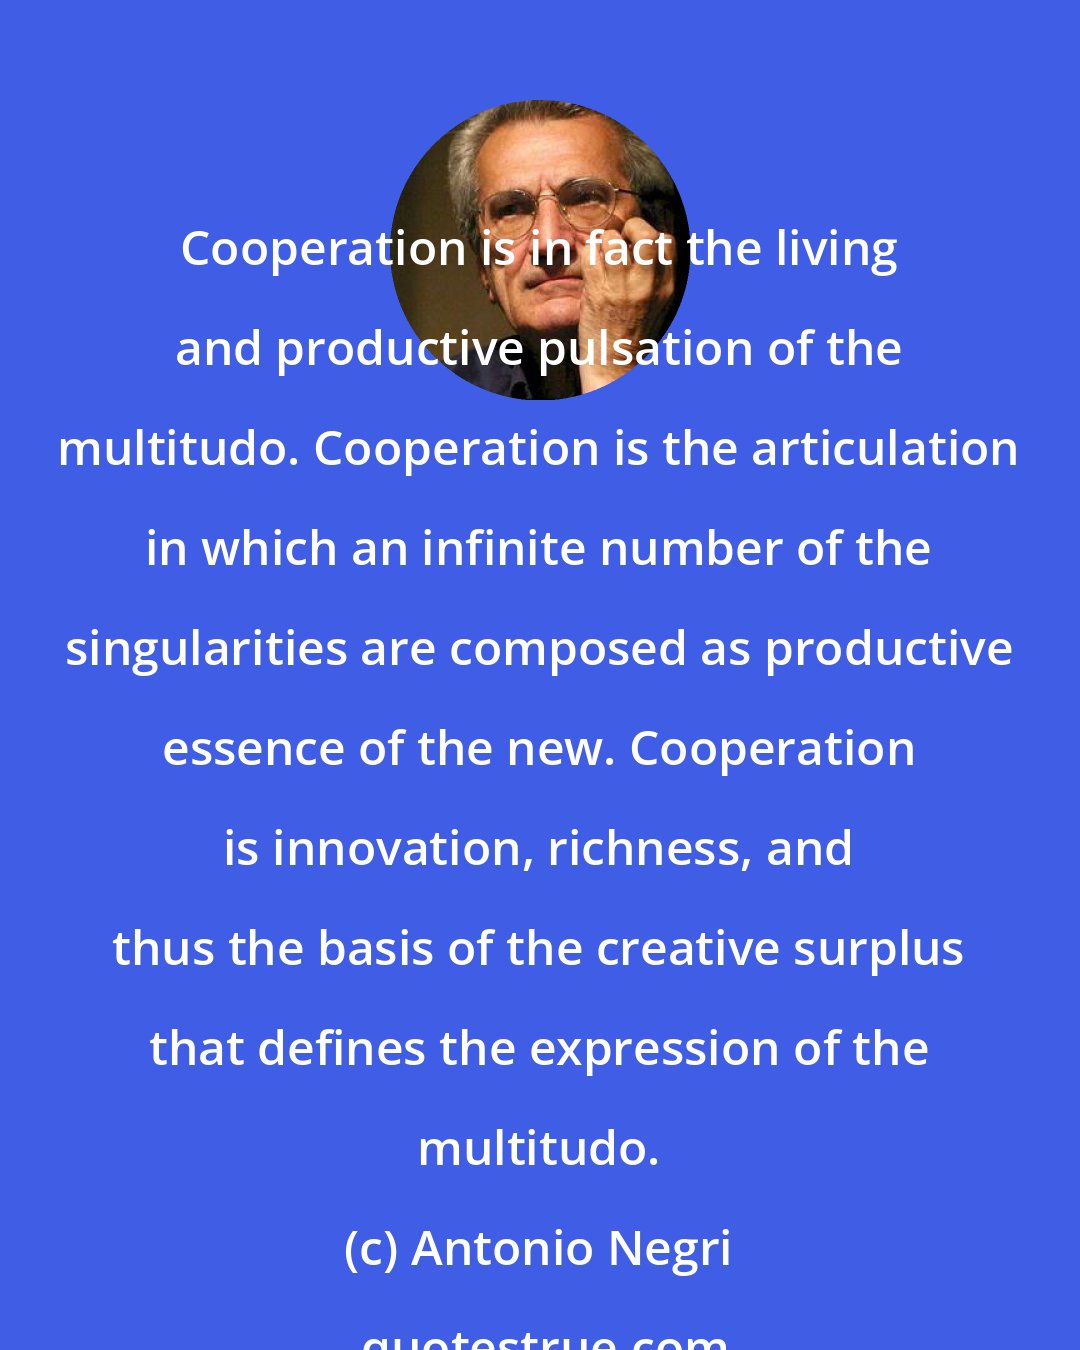 Antonio Negri: Cooperation is in fact the living and productive pulsation of the multitudo. Cooperation is the articulation in which an infinite number of the singularities are composed as productive essence of the new. Cooperation is innovation, richness, and thus the basis of the creative surplus that defines the expression of the multitudo.